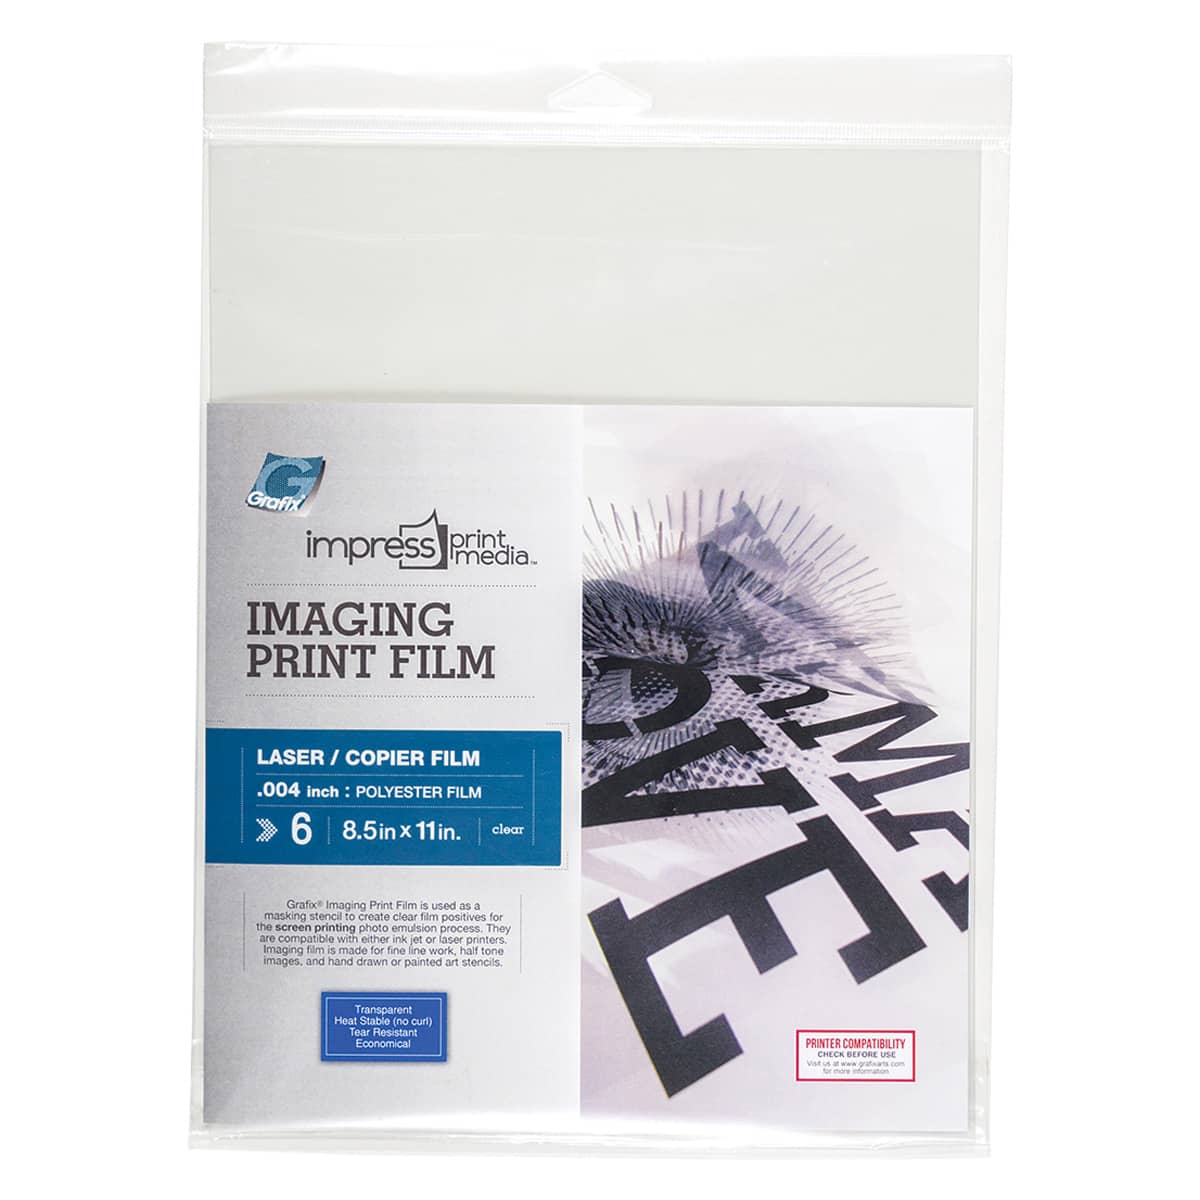 100 Sheets Tracing Paper, 11.5 x 8 inches Artists Tracing Paper Pad White  Trace Paper Translucent Clear Tracing Sheets for Sketching Tracing Drawing